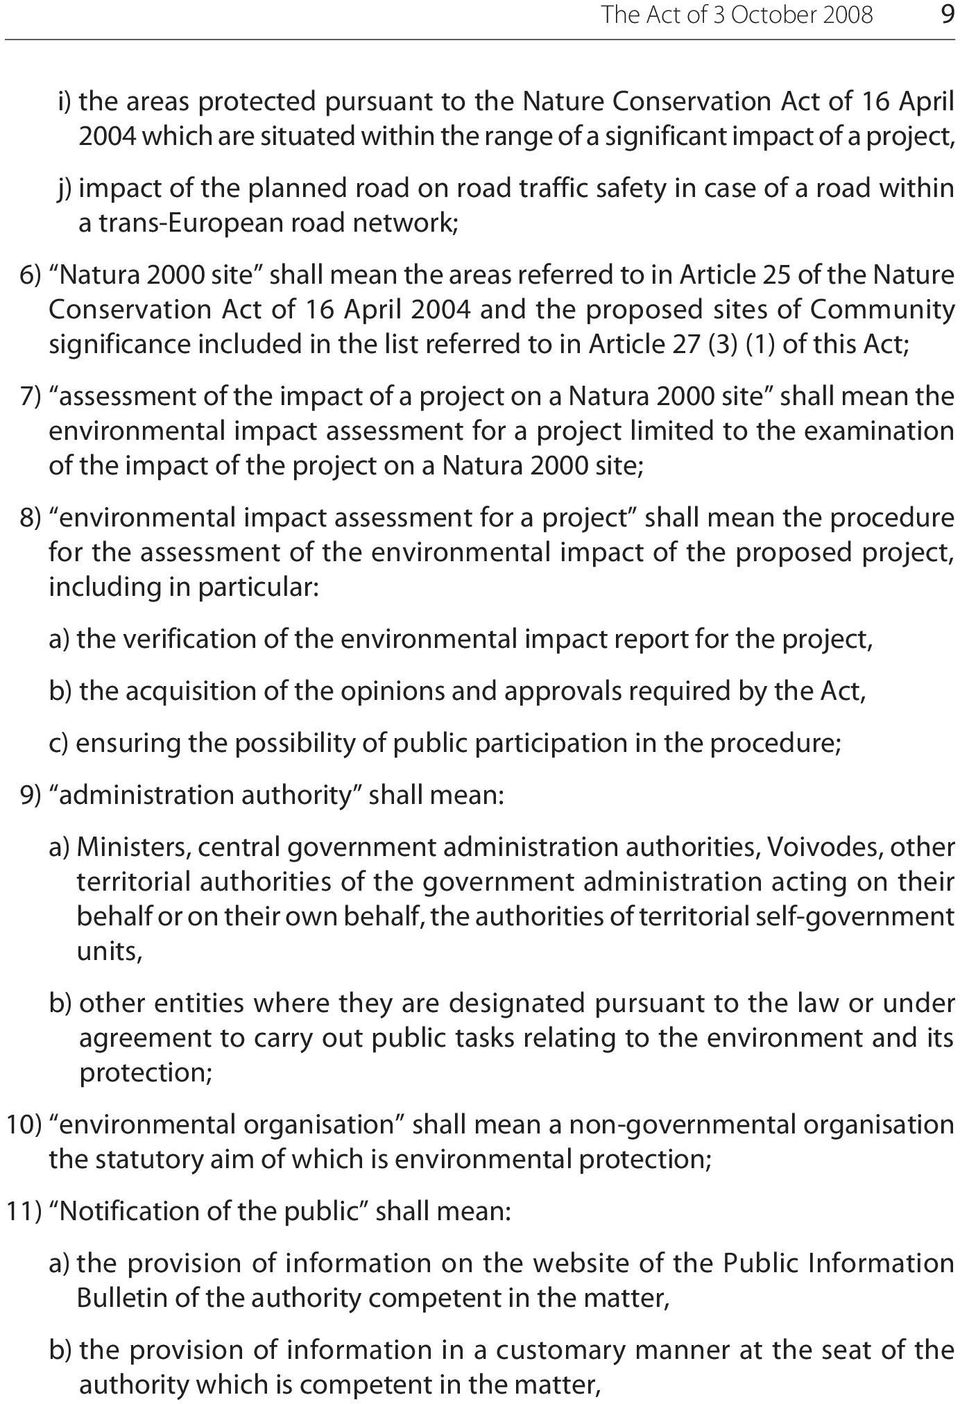 April 2004 and the proposed sites of Community significance included in the list referred to in Article 27 (3) (1) of this Act; 7) assessment of the impact of a project on a Natura 2000 site shall